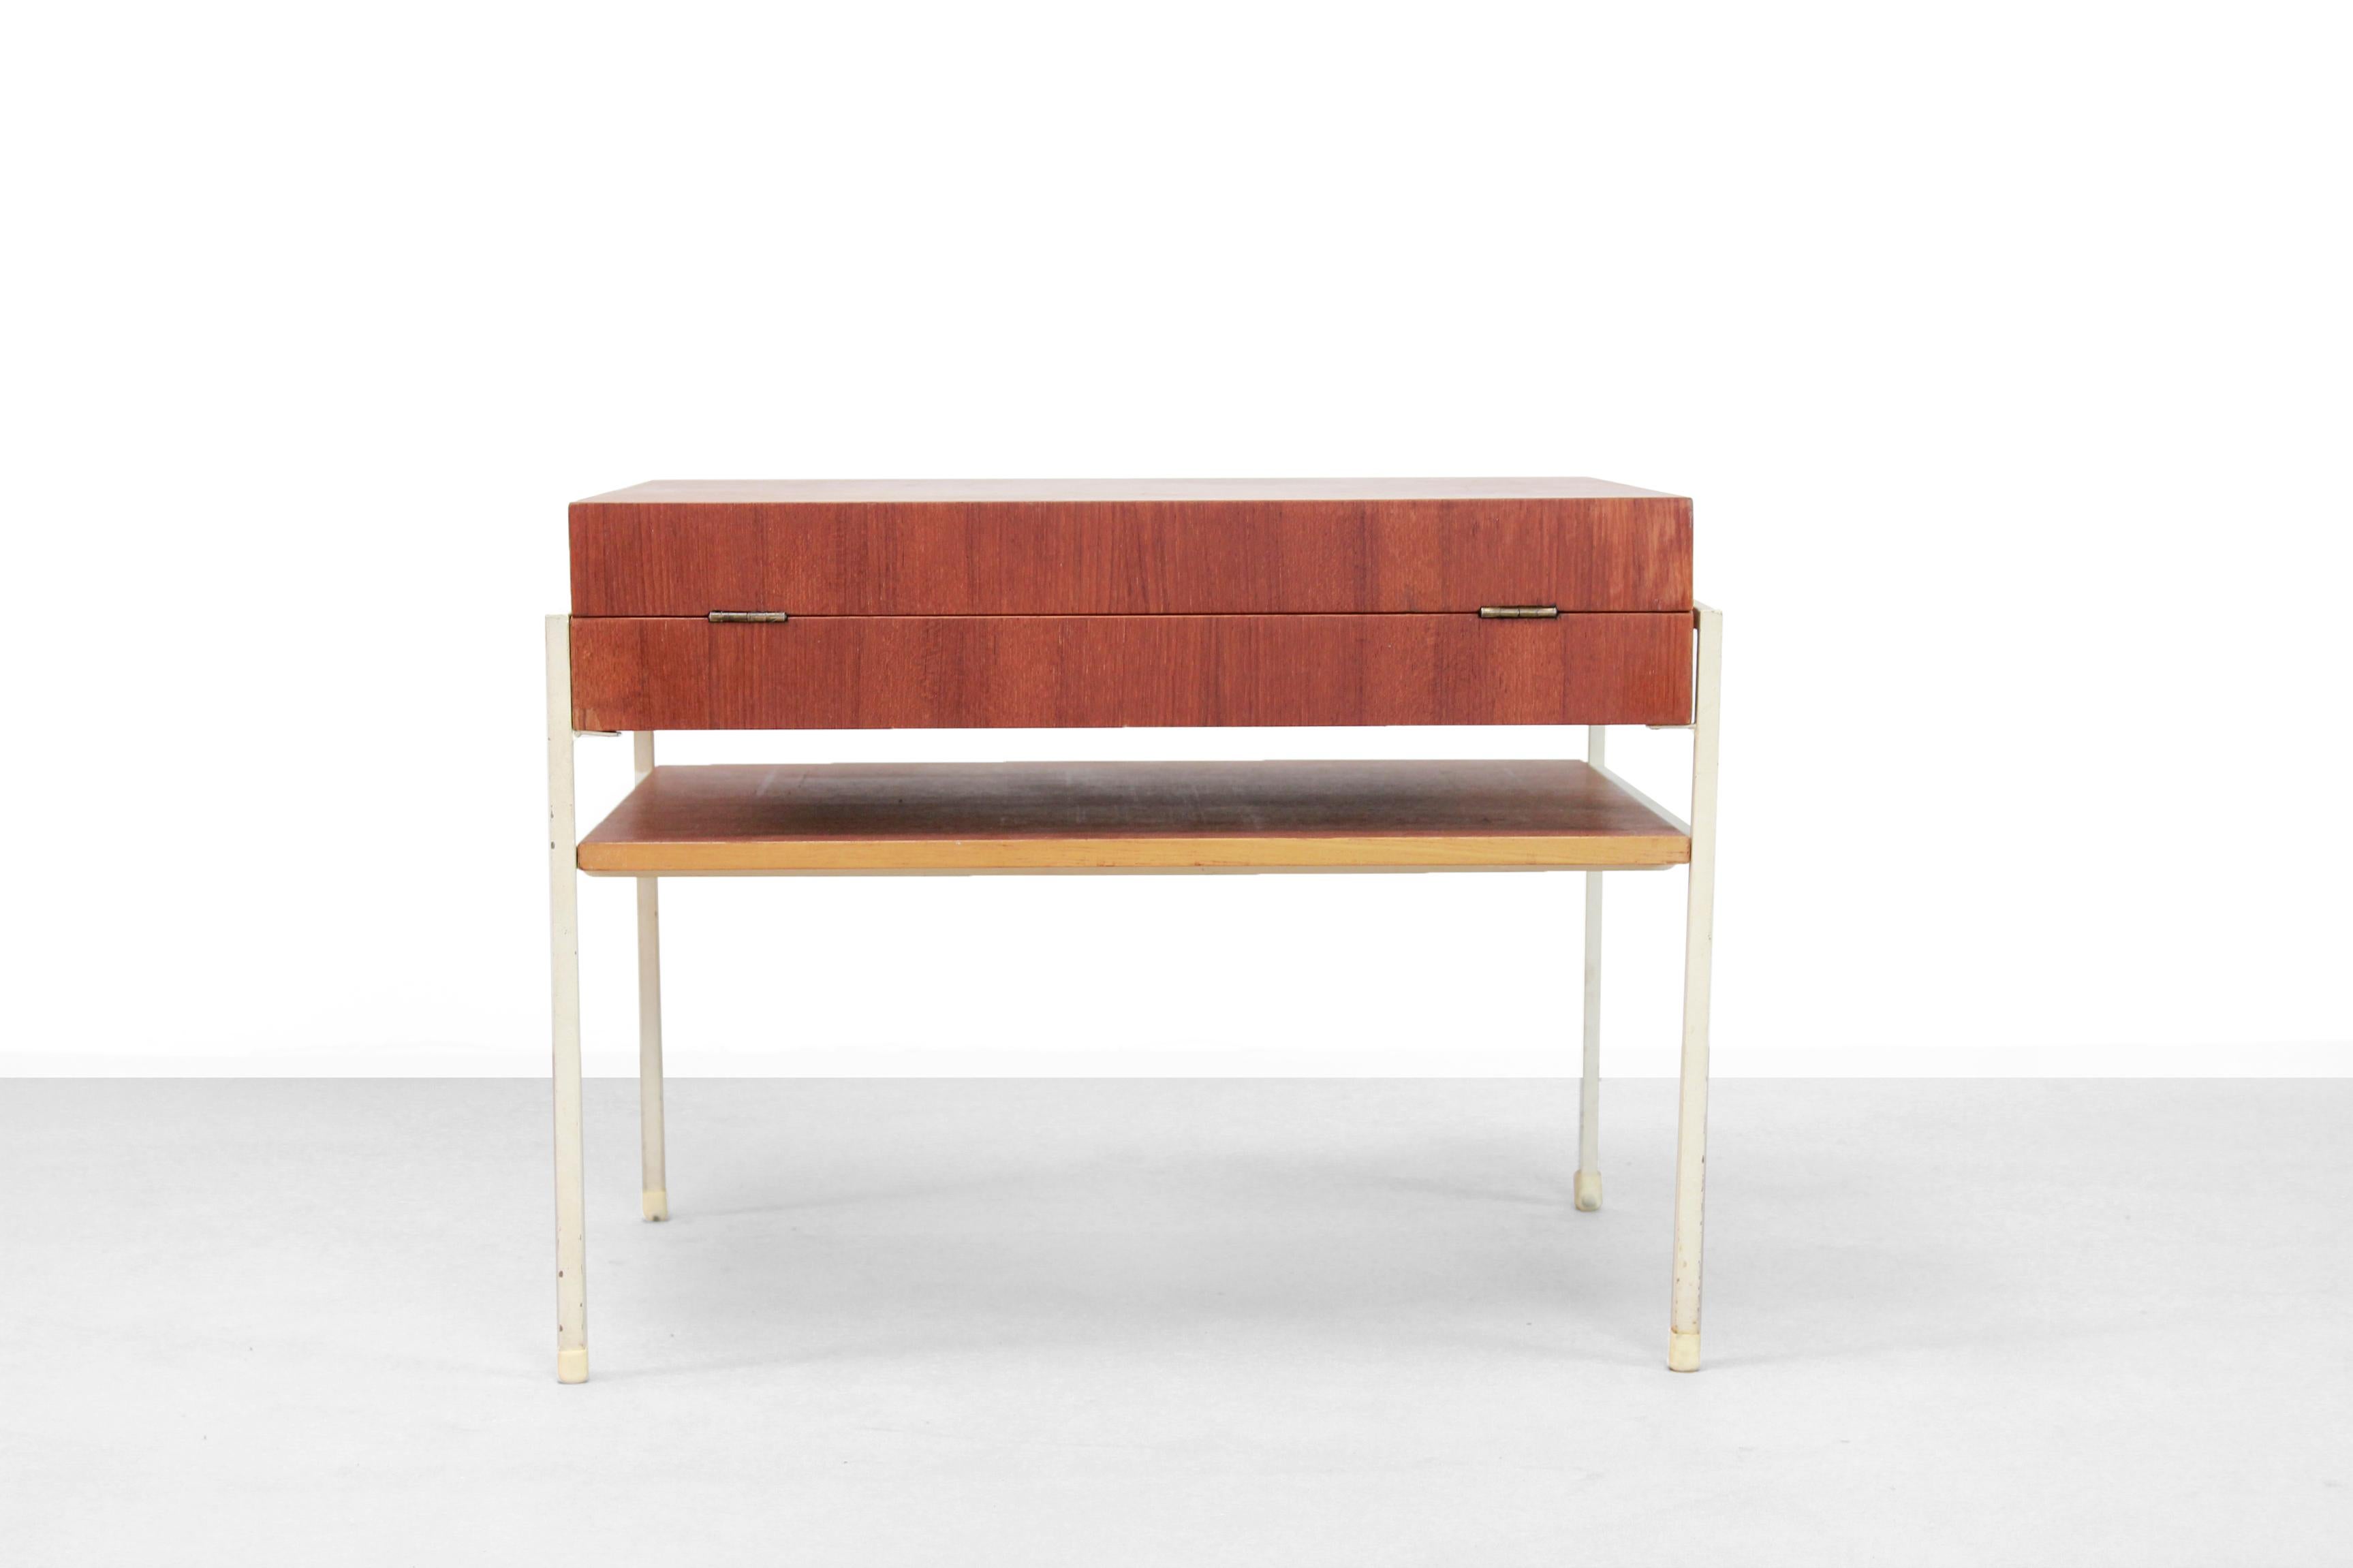 Super rare sewing table designed by Coen de Vries for Tetex, the Netherlands. Made from a white lacquered metal frame and a teak veneered cabinet. The way the cabinet can be opened is really beautiful. The two 'doors' at the top can be opened to the